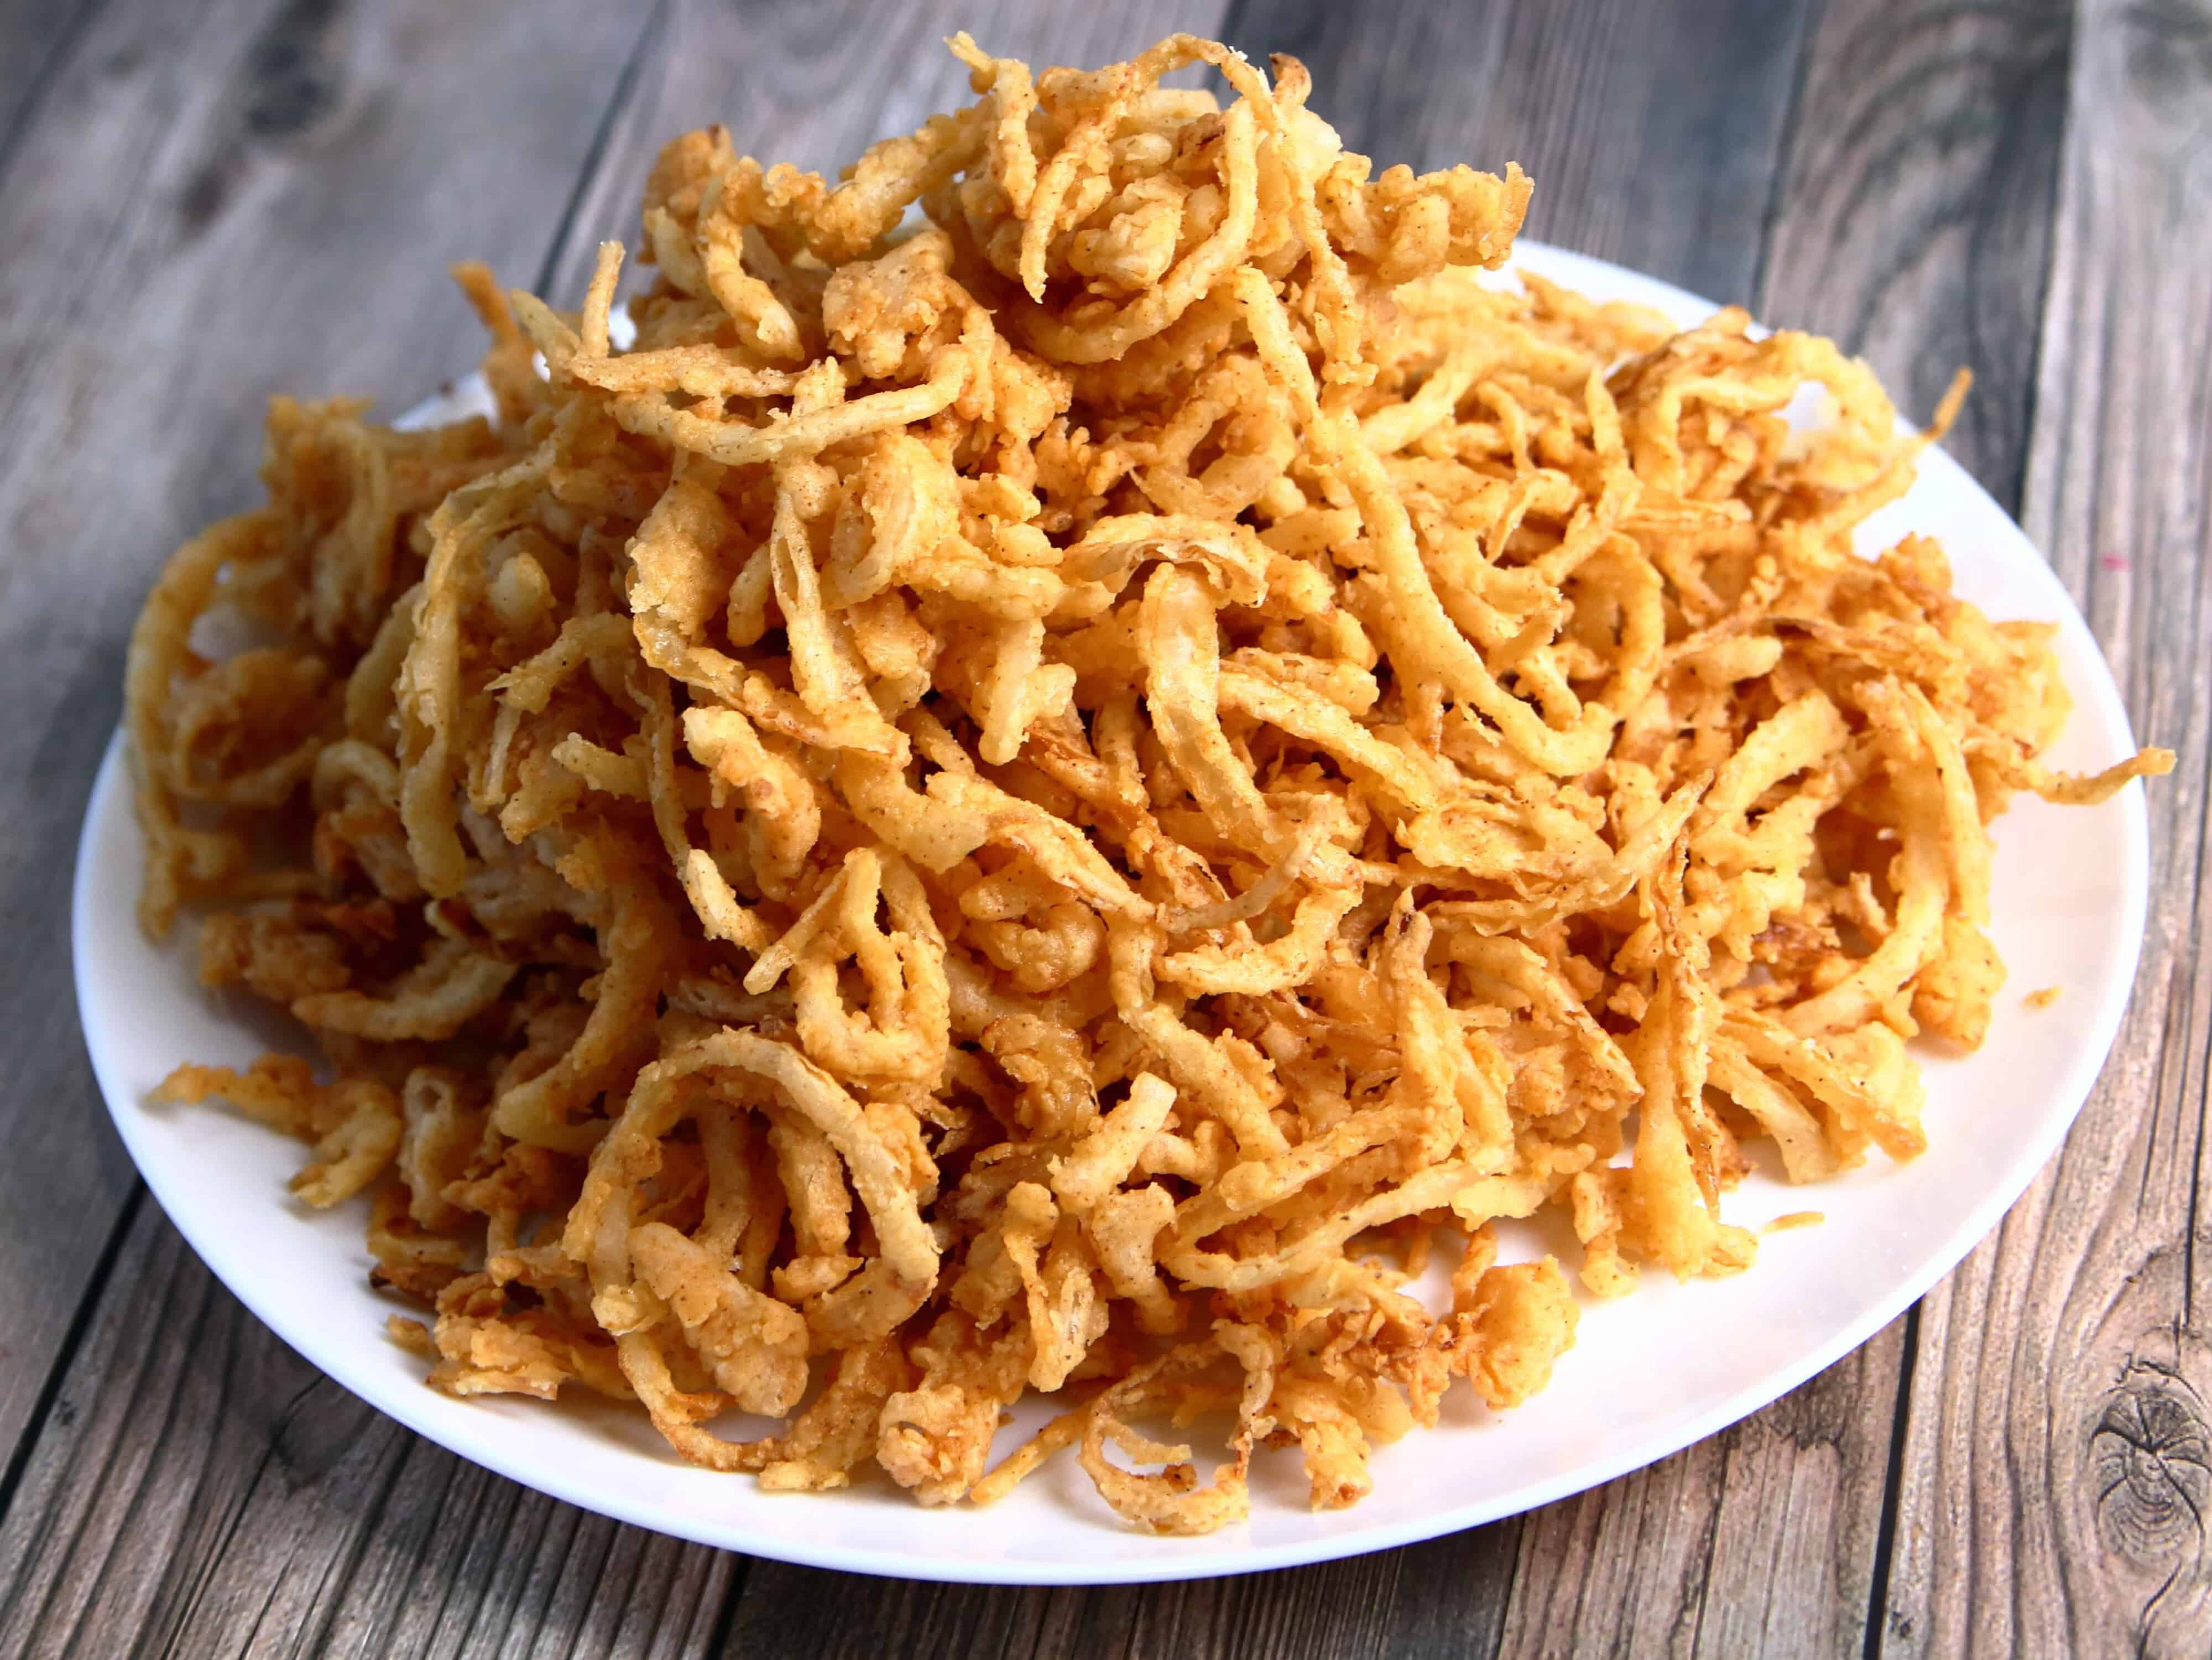 How to: Make Crispy Shoestring Onions - Our Best Bites